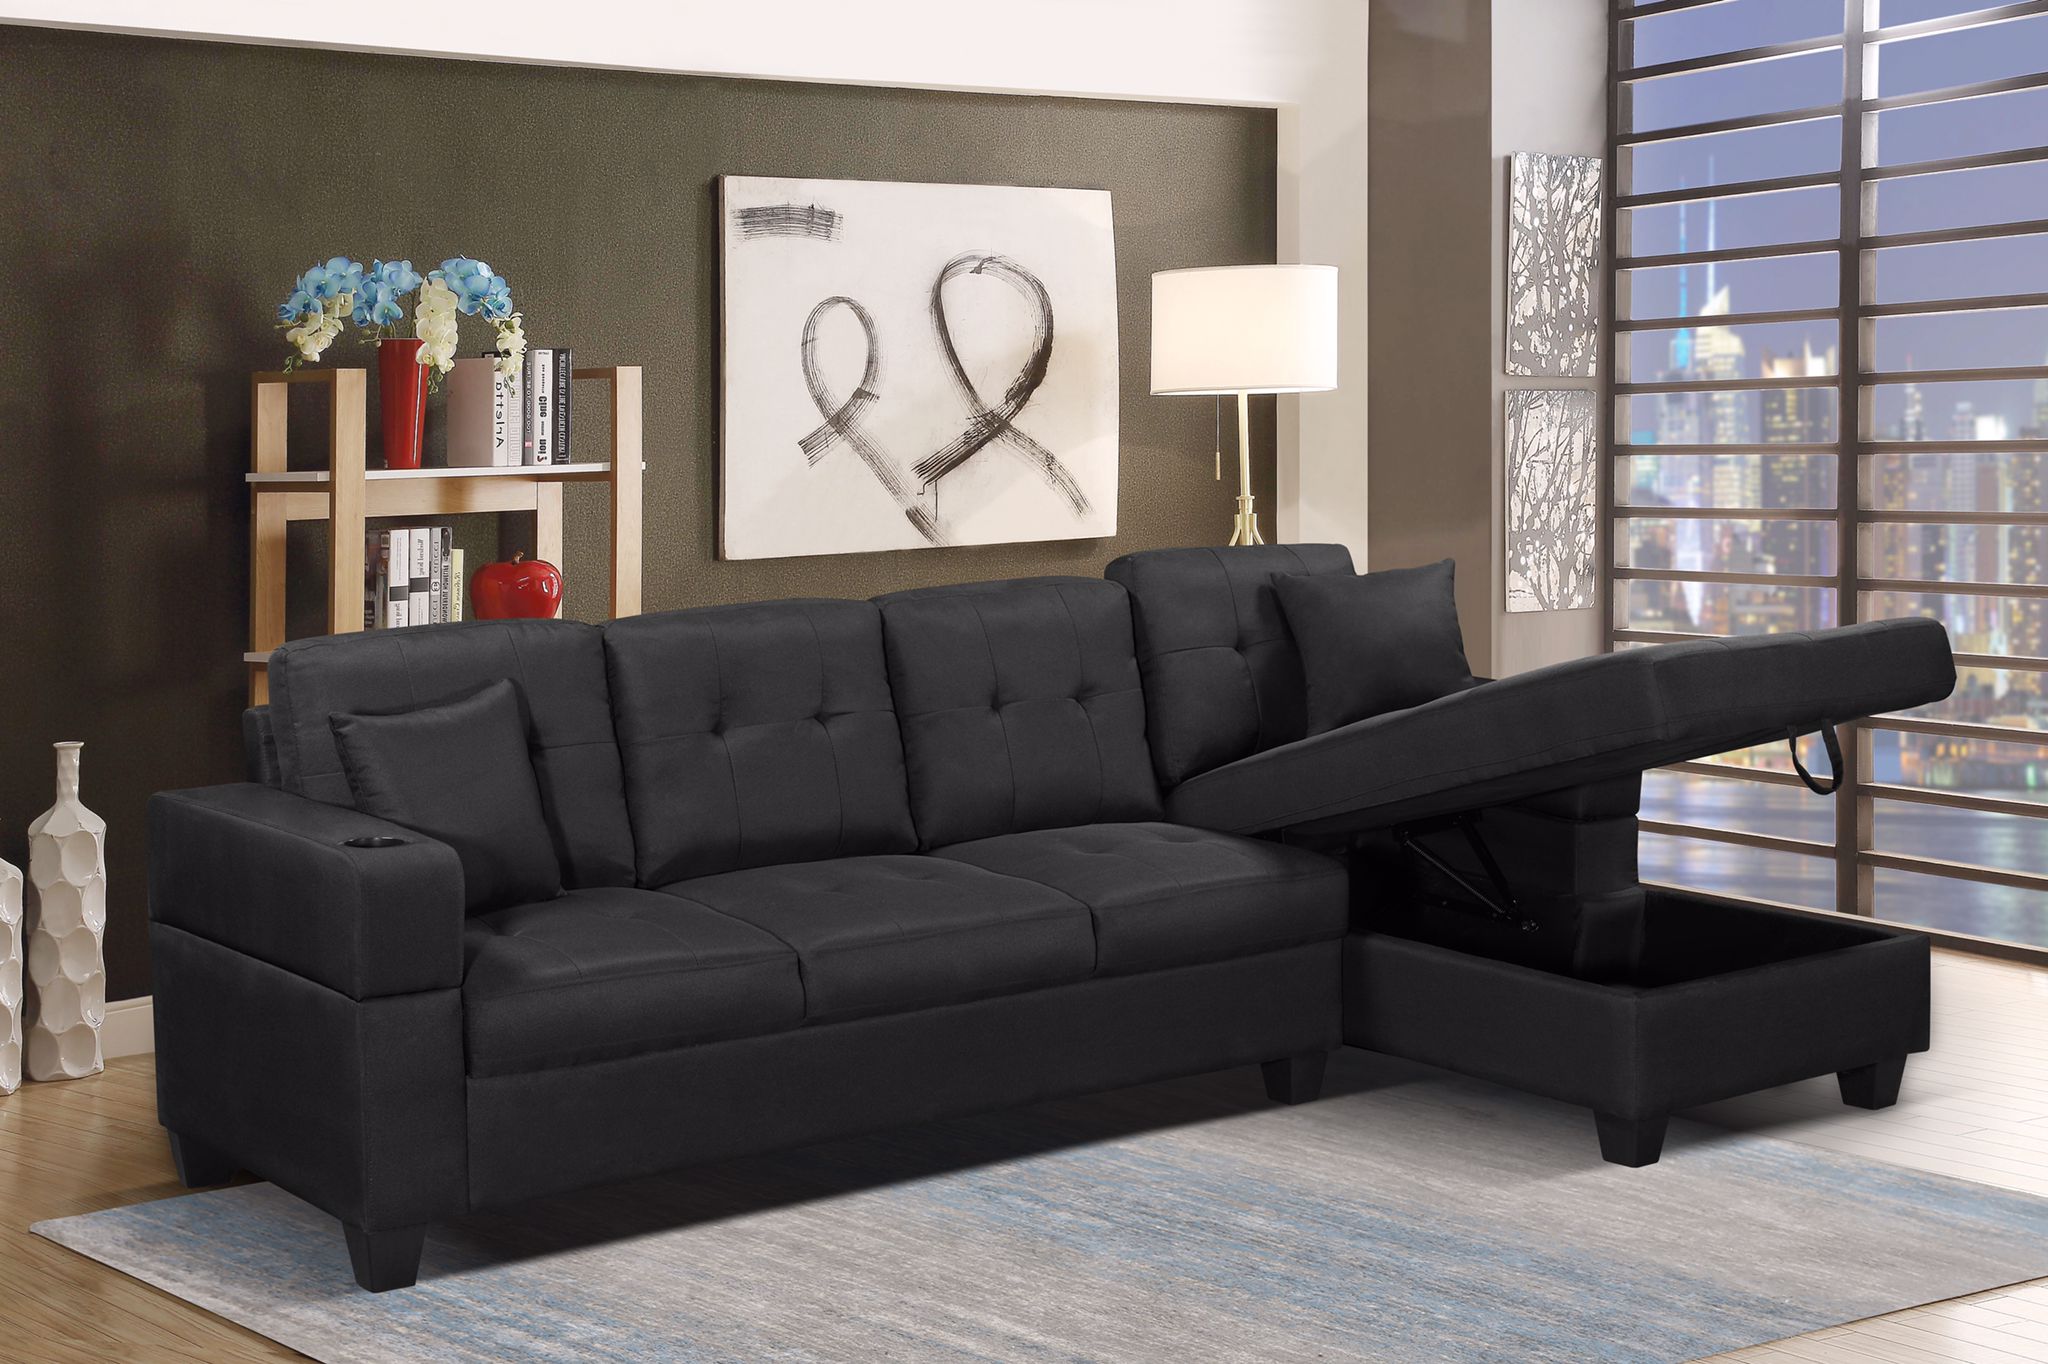 Black Fabric Sectional Sofa With Storage 1839